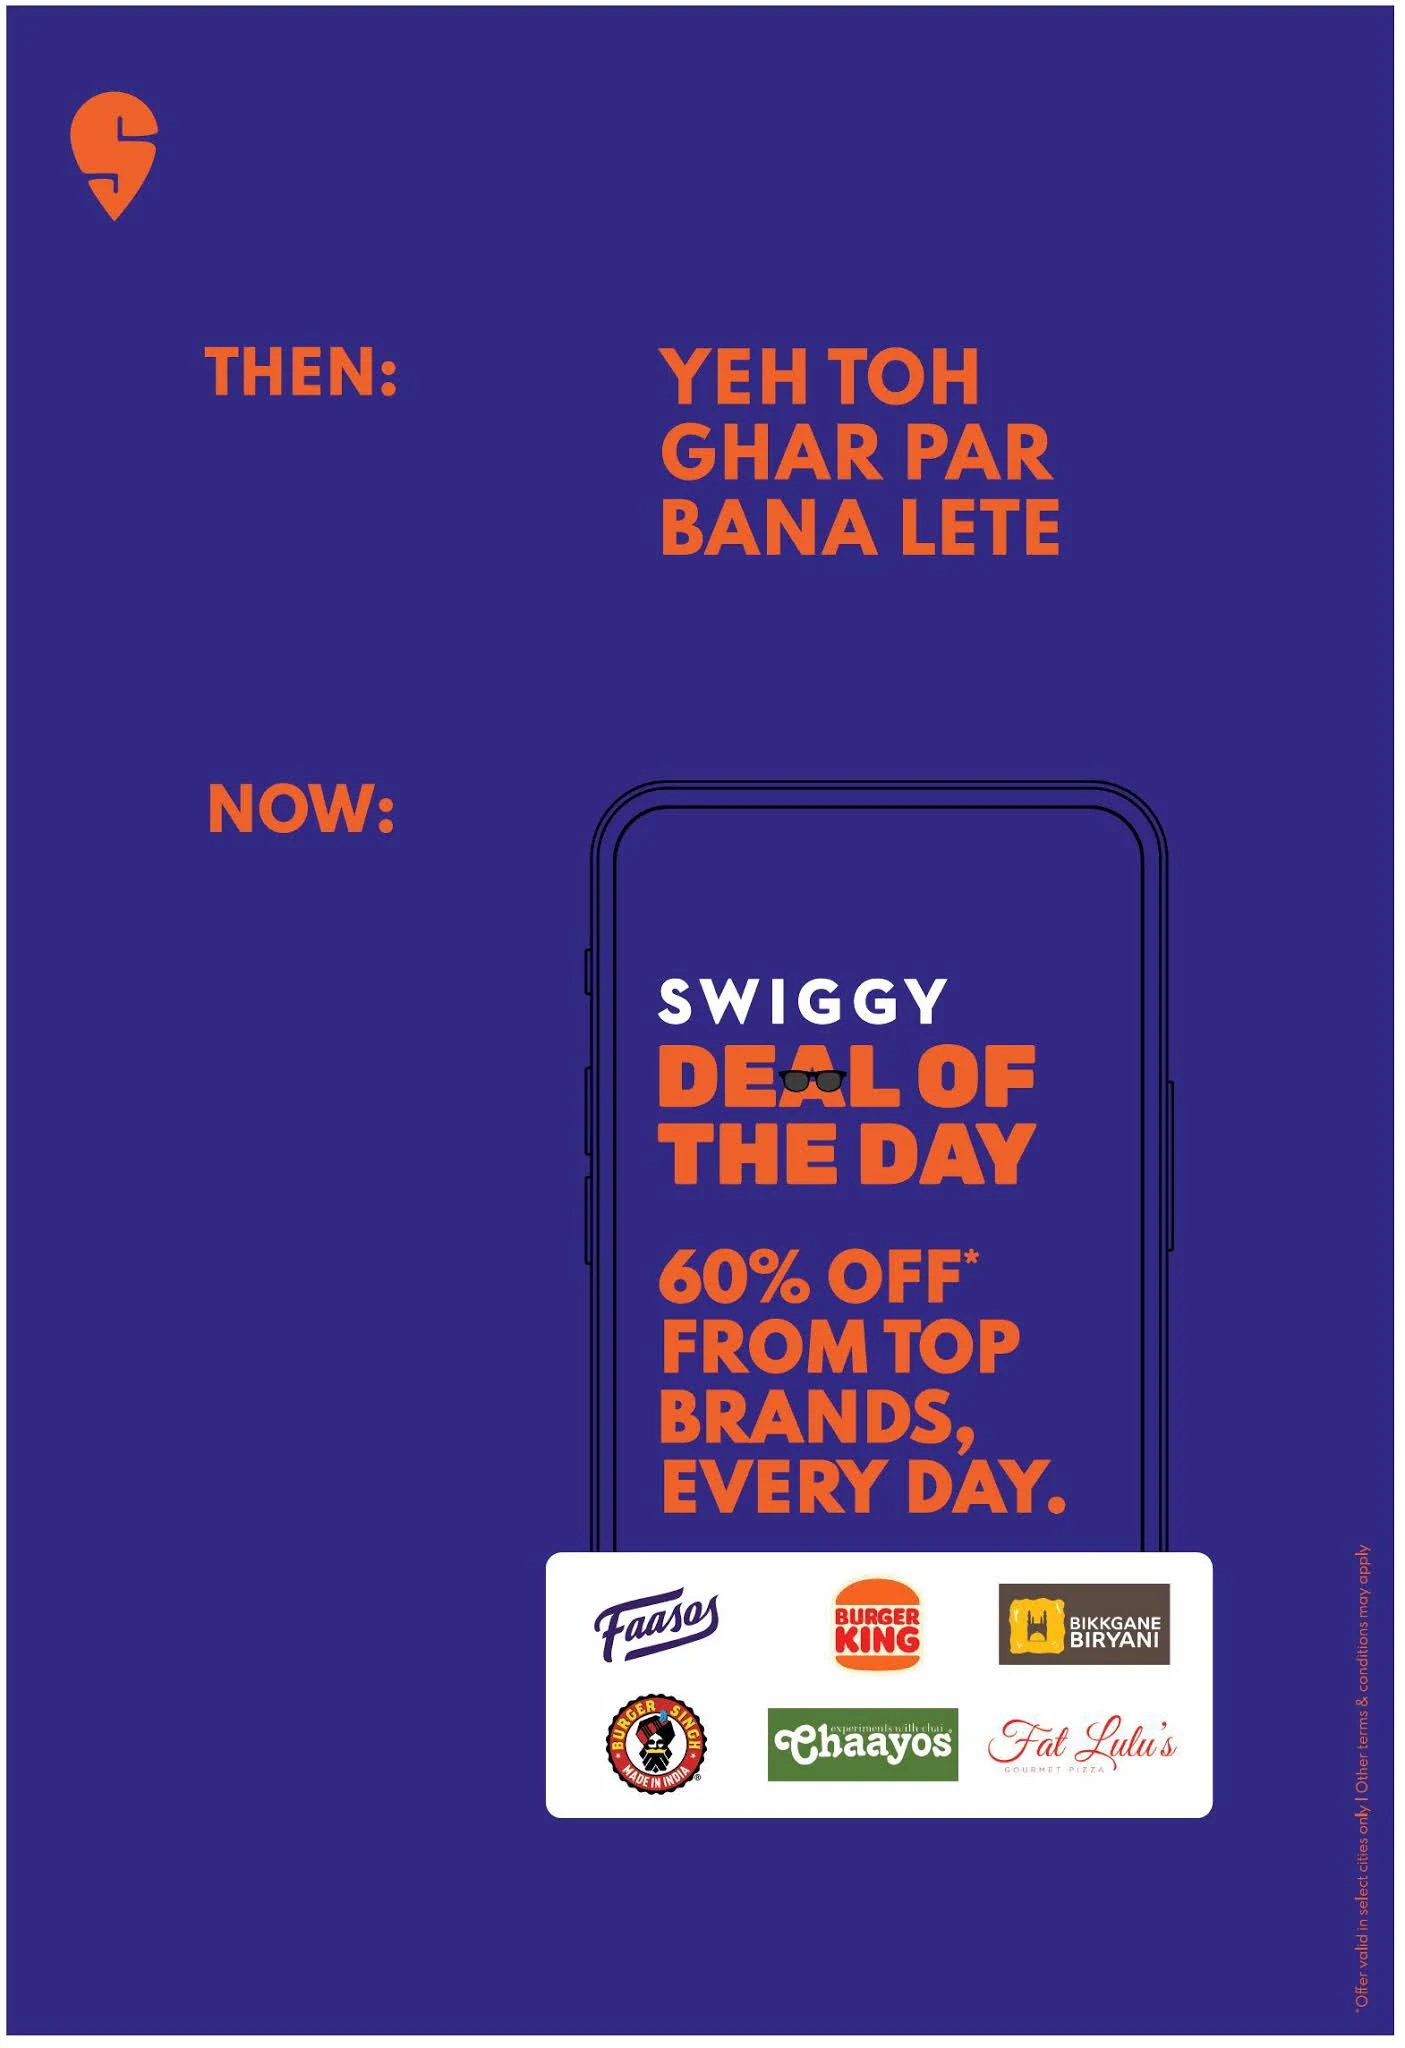 #5 Swiggy Deal of the Day